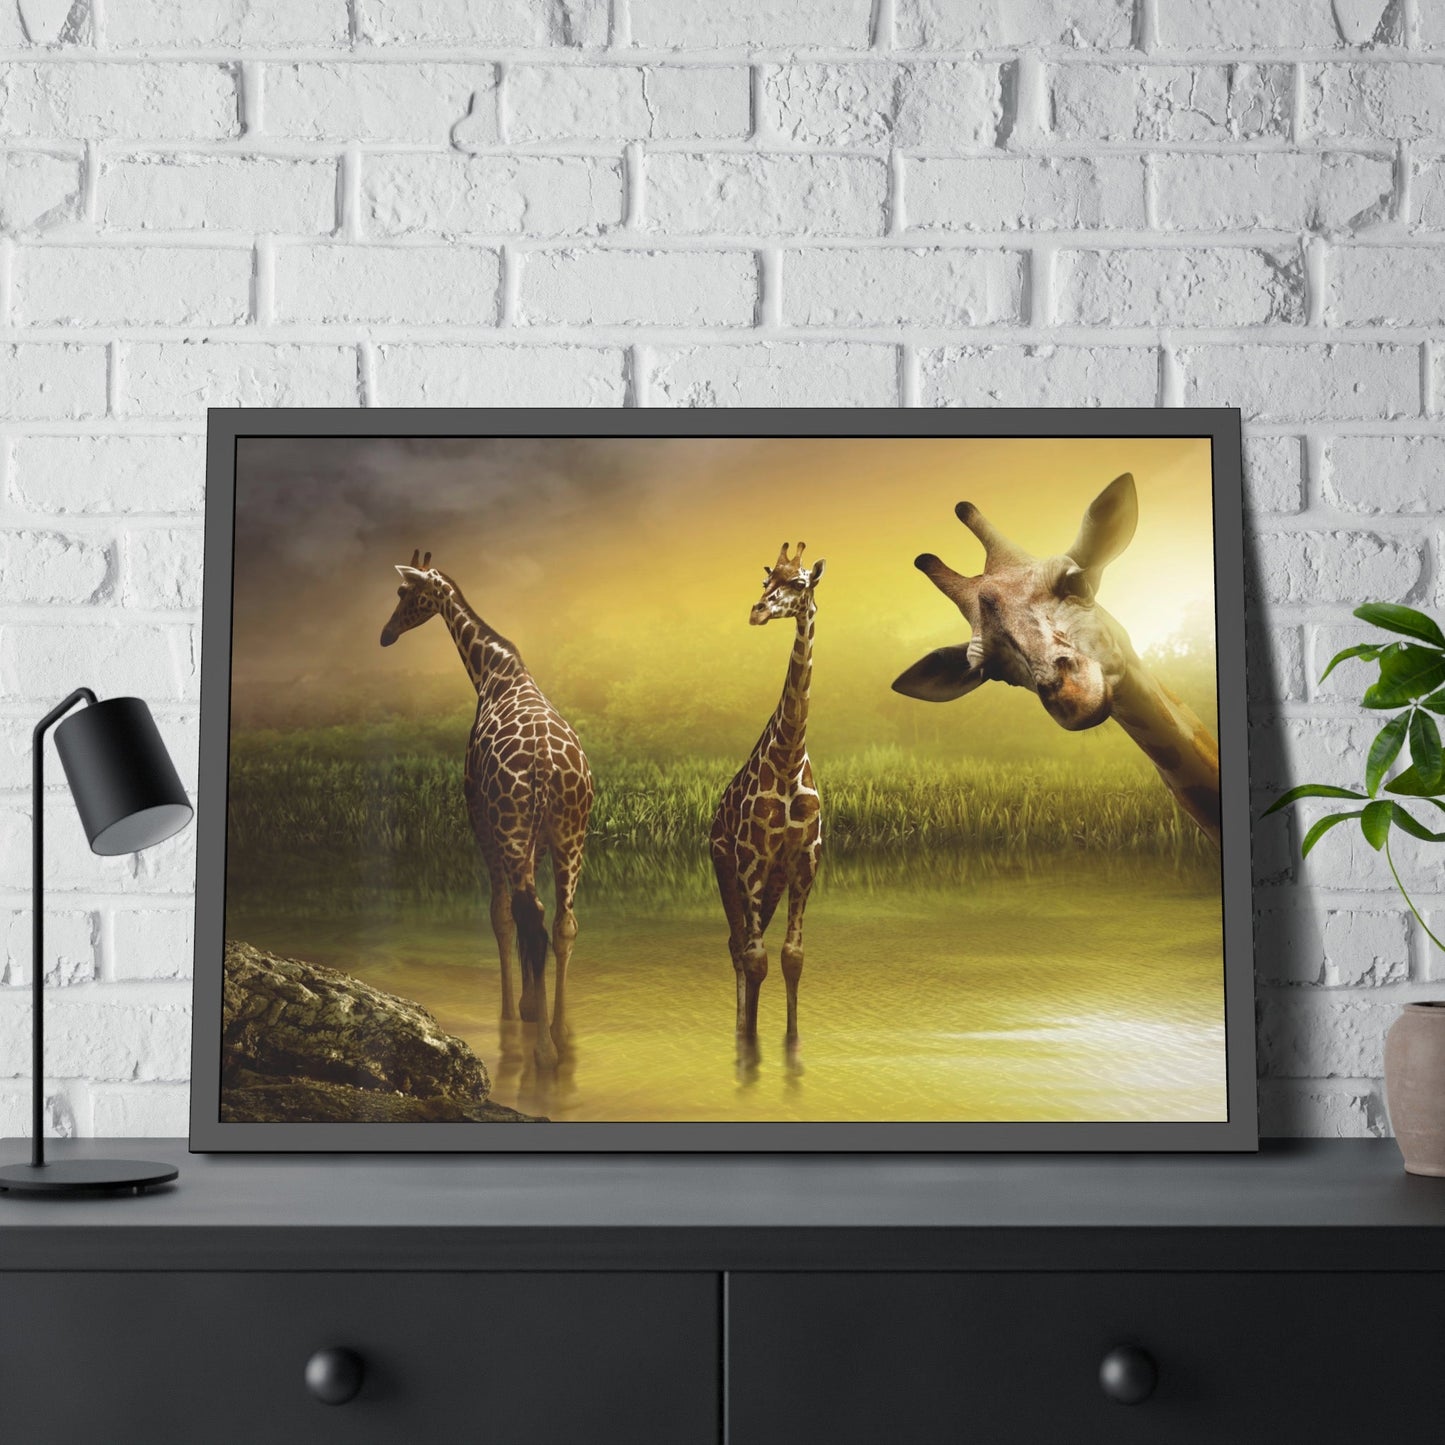 Nature's Gentle Giants: Poster & Canvas of Giraffes in Their Natural Habitat